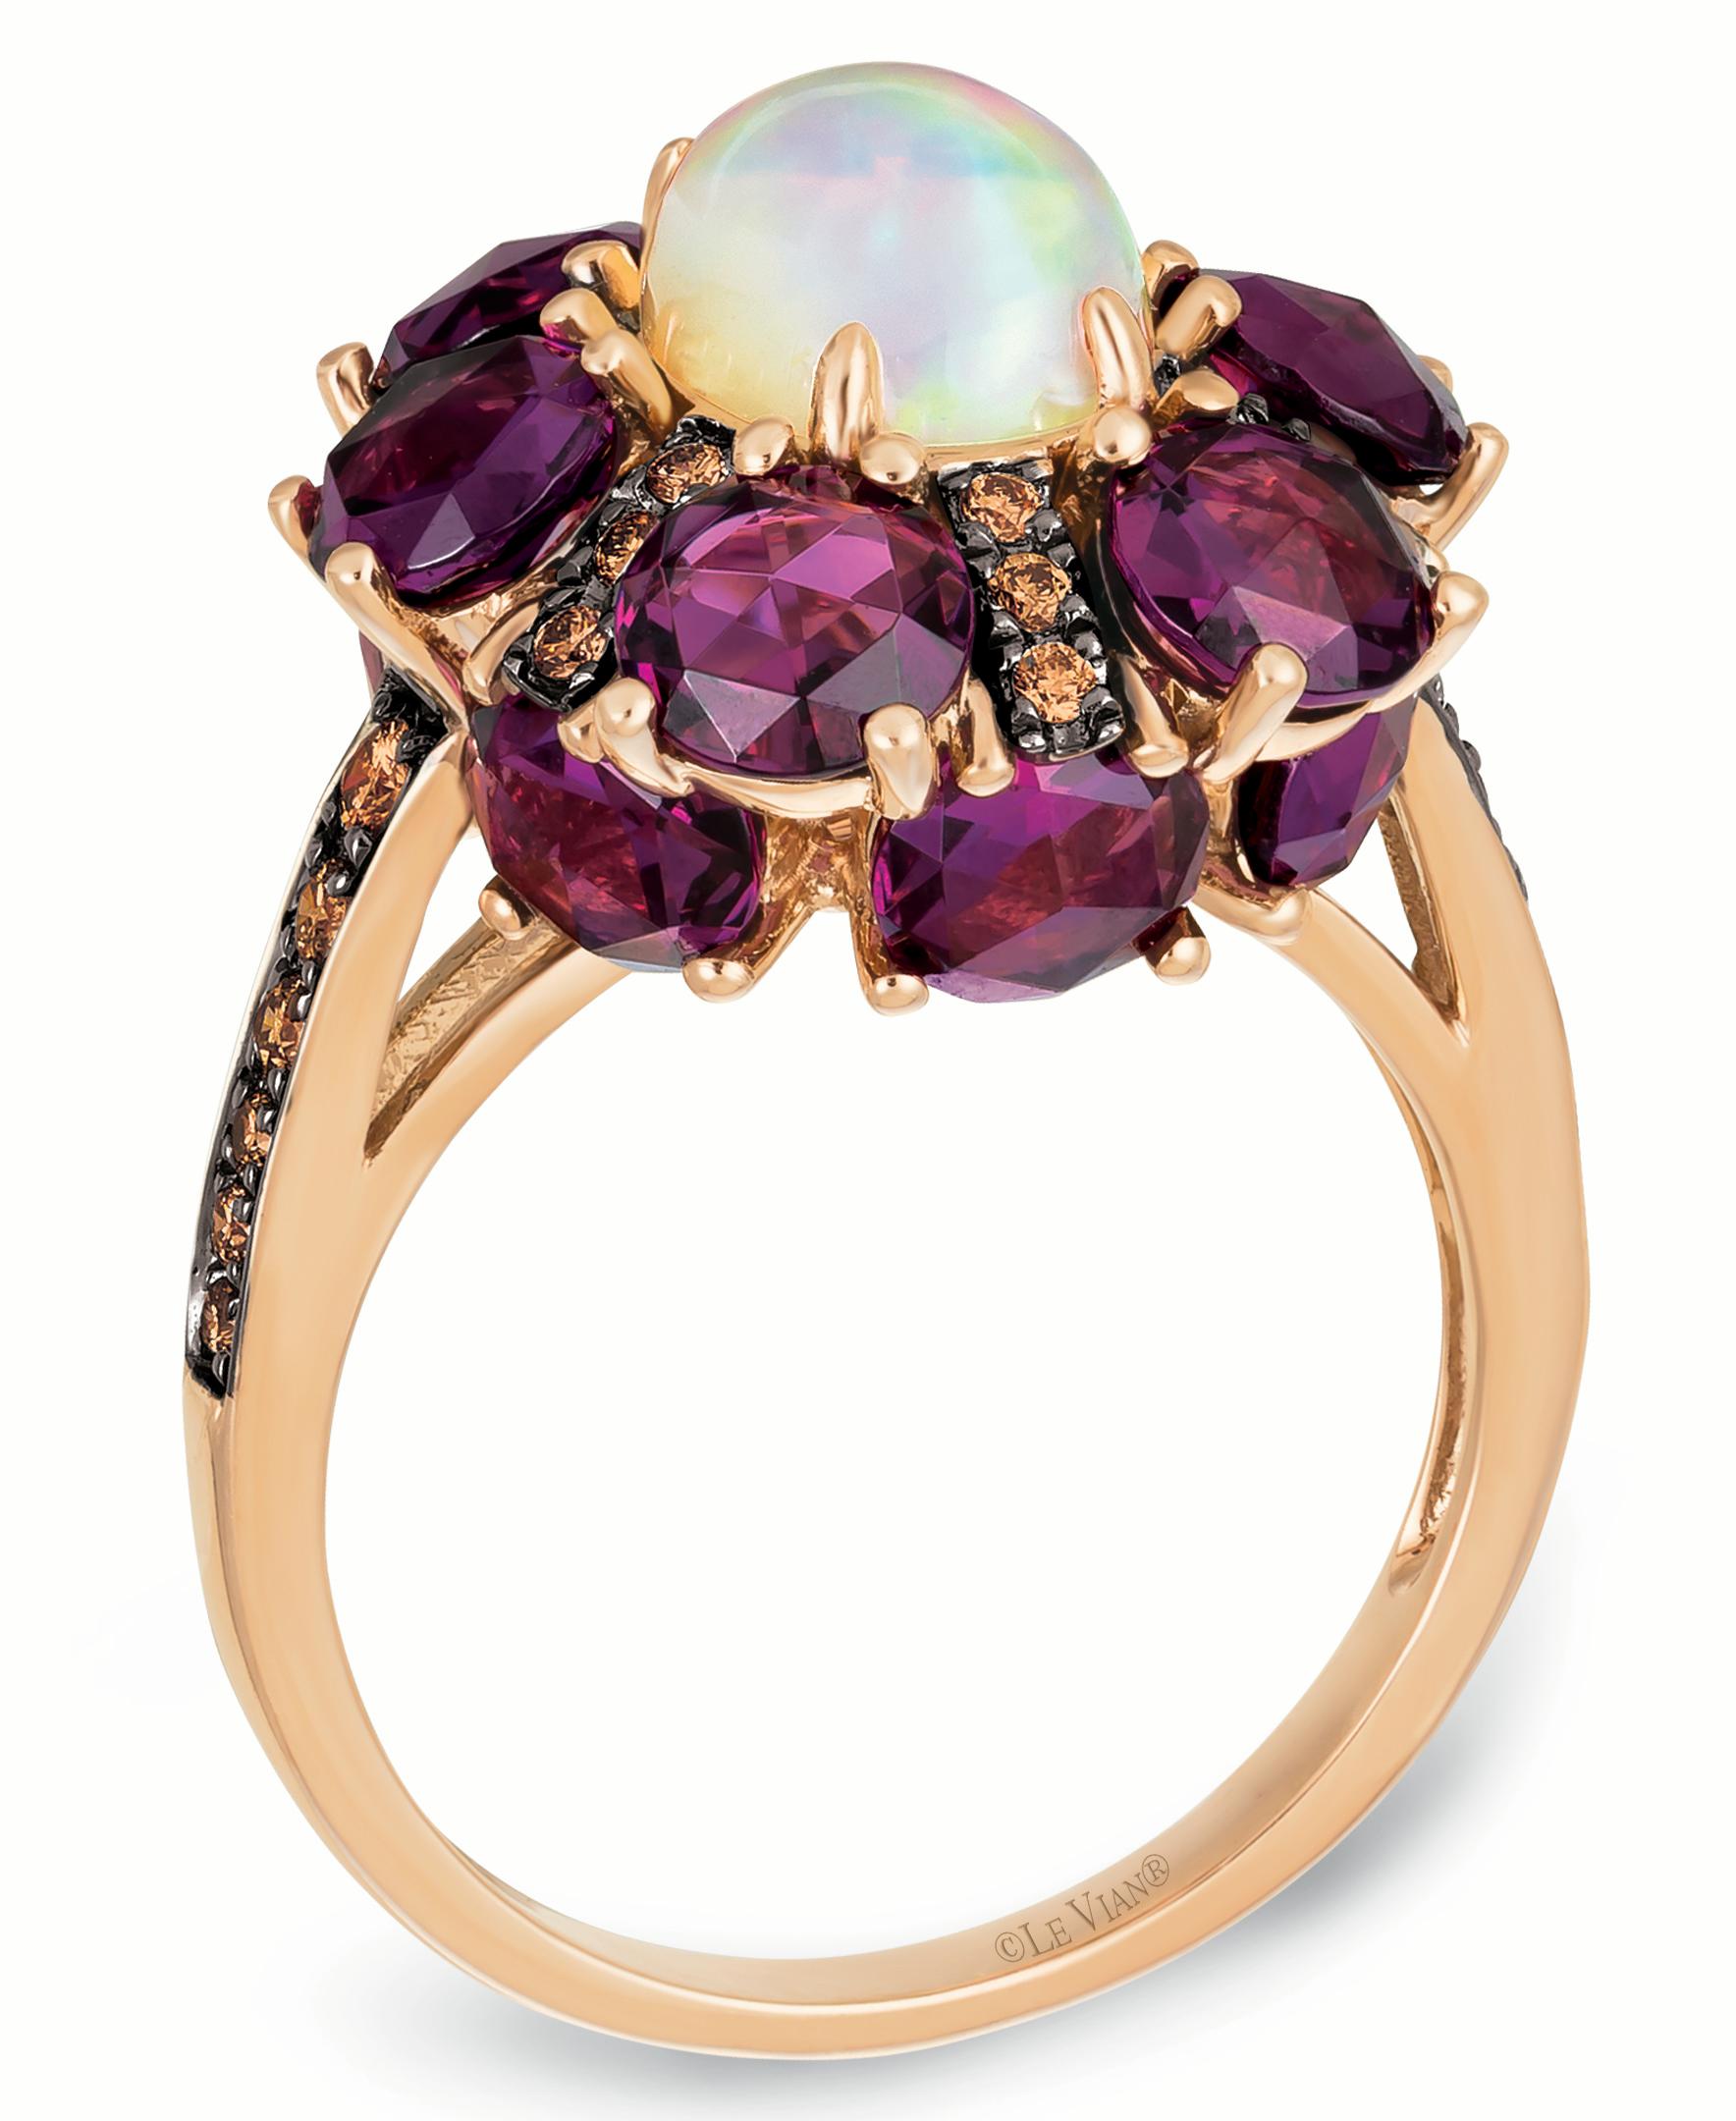 Le Vian Chocolatier® Ring featuring 7/8 cts. Neopolitan Opal™, 5  3/4 cts. Raspberry Rhodolite®, 1/3 cts. Chocolate Diamonds®  set in 14K Strawberry Gold®
